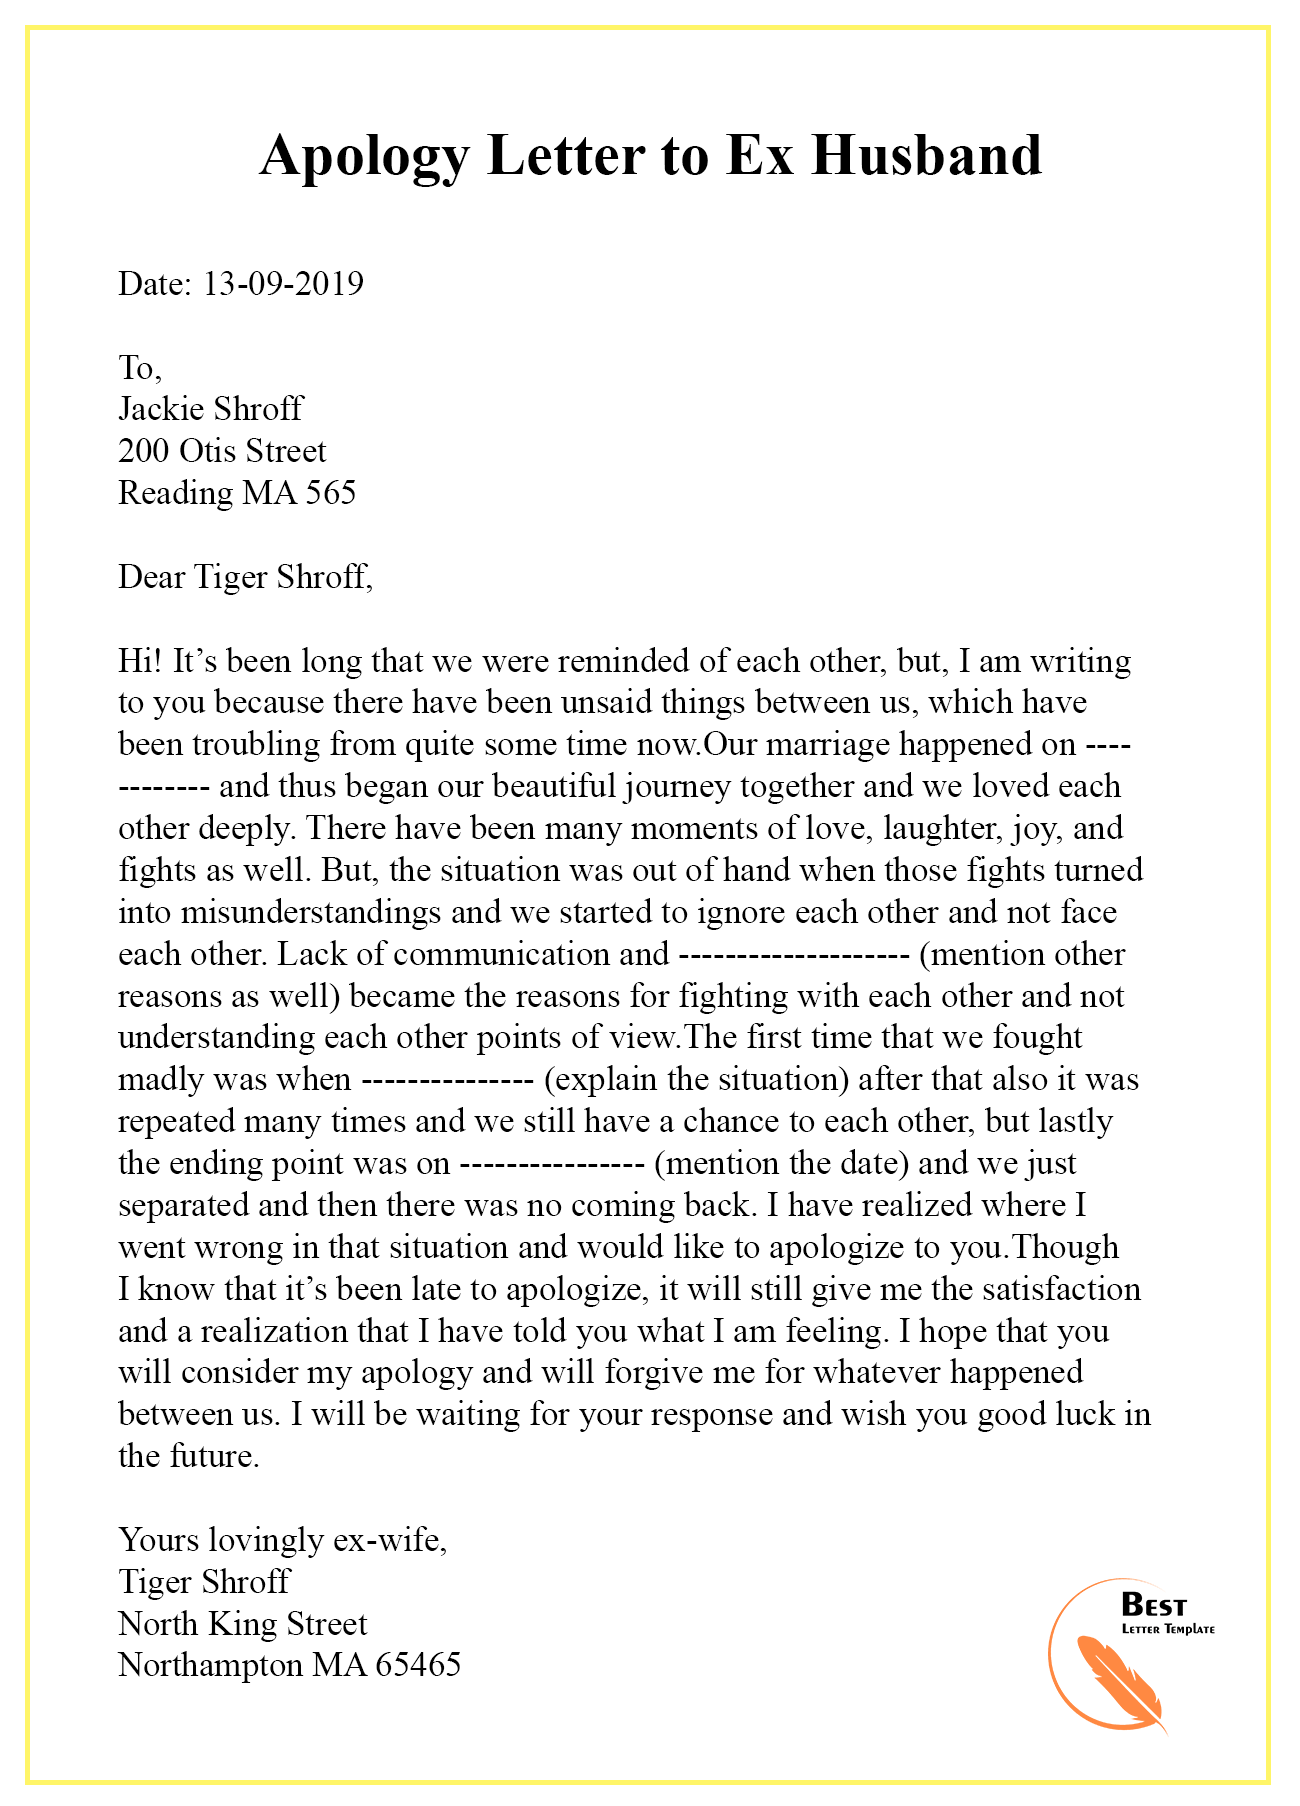 Apology Letter Template to Ex - Sample & Examples